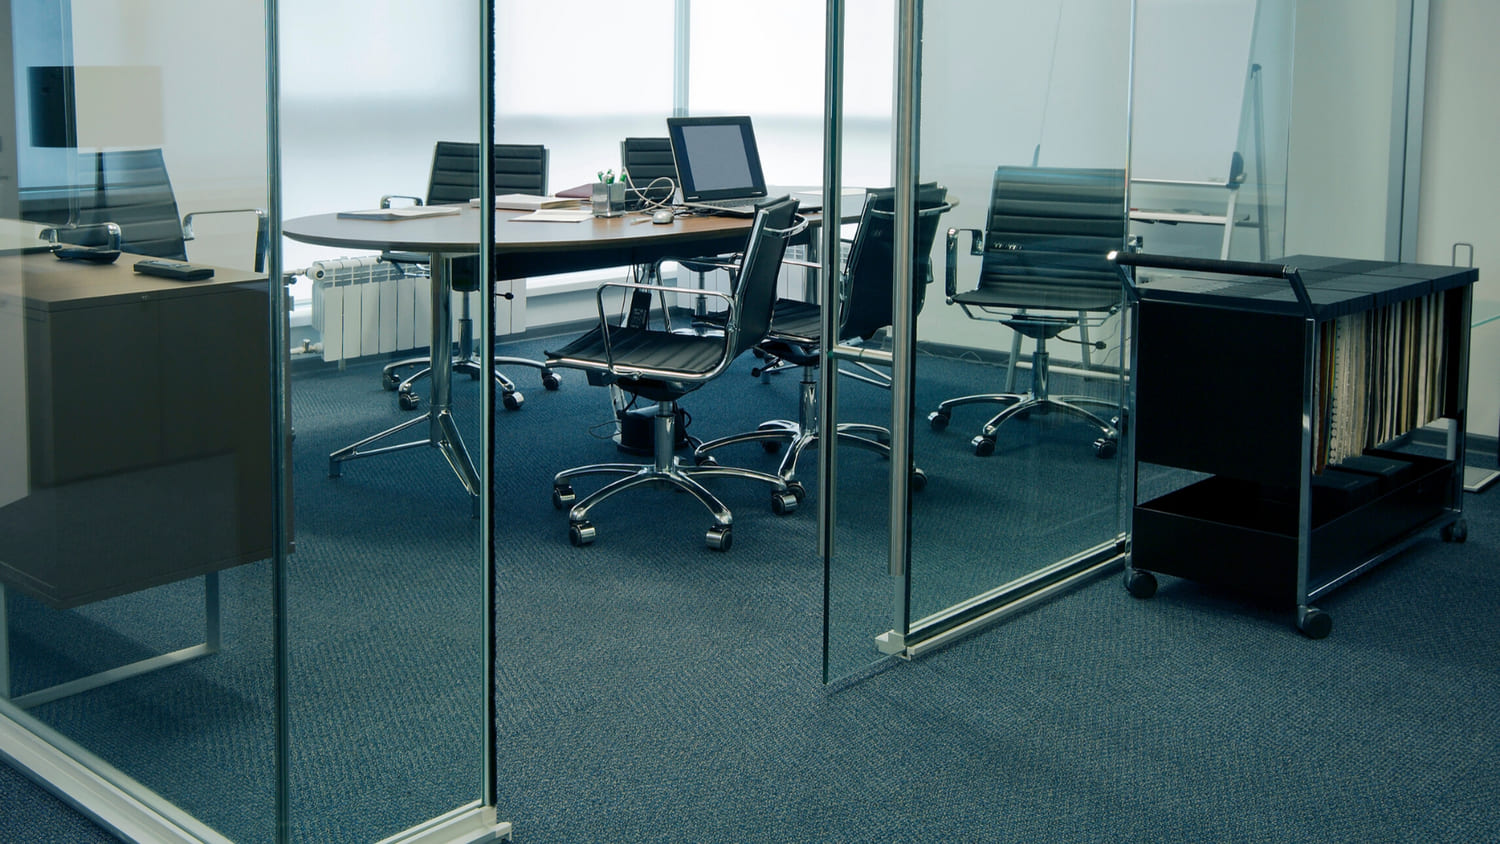 An office space and conference area with dark commercial carpet